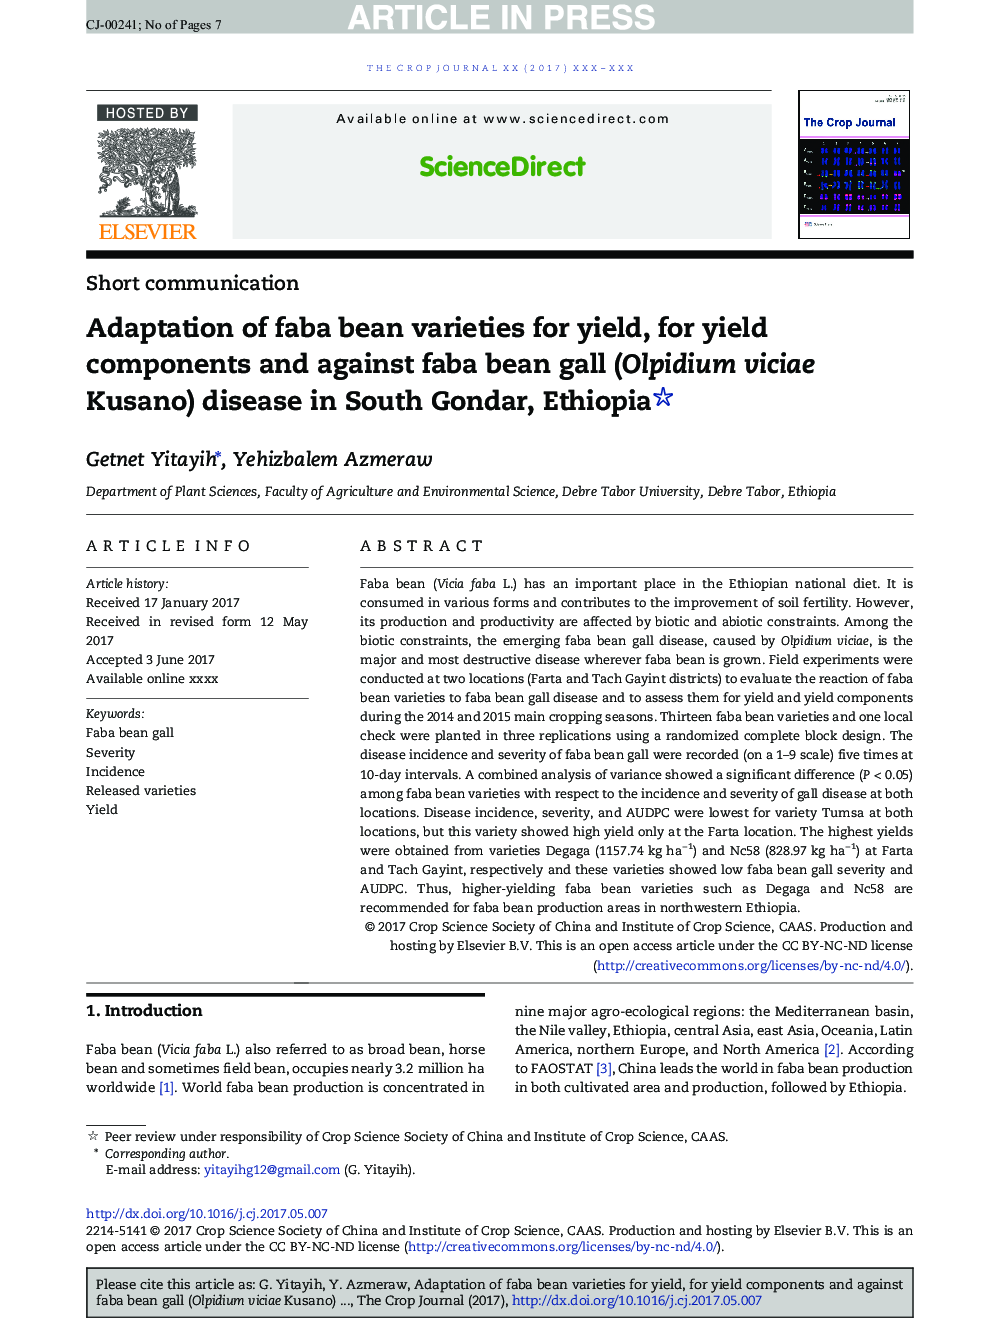 Adaptation of faba bean varieties for yield, for yield components and against faba bean gall (Olpidium viciae Kusano) disease in South Gondar, Ethiopia